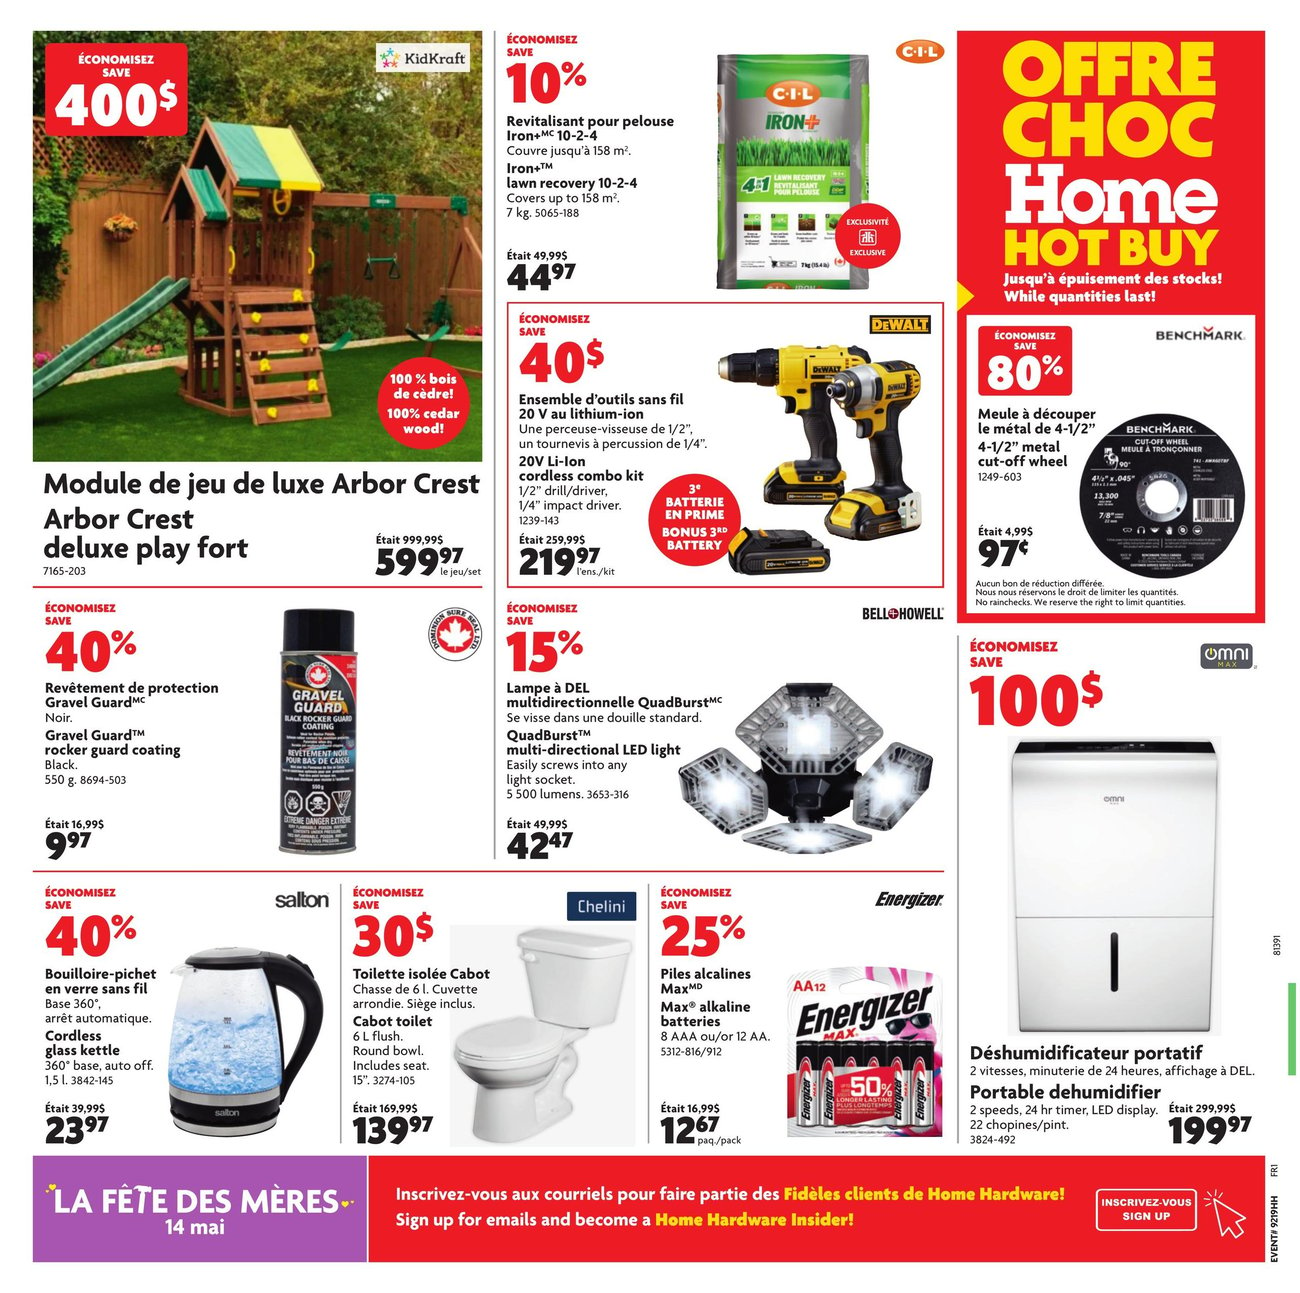 Home Hardware - Quebec - 2 Weeks of Savings - Page 2